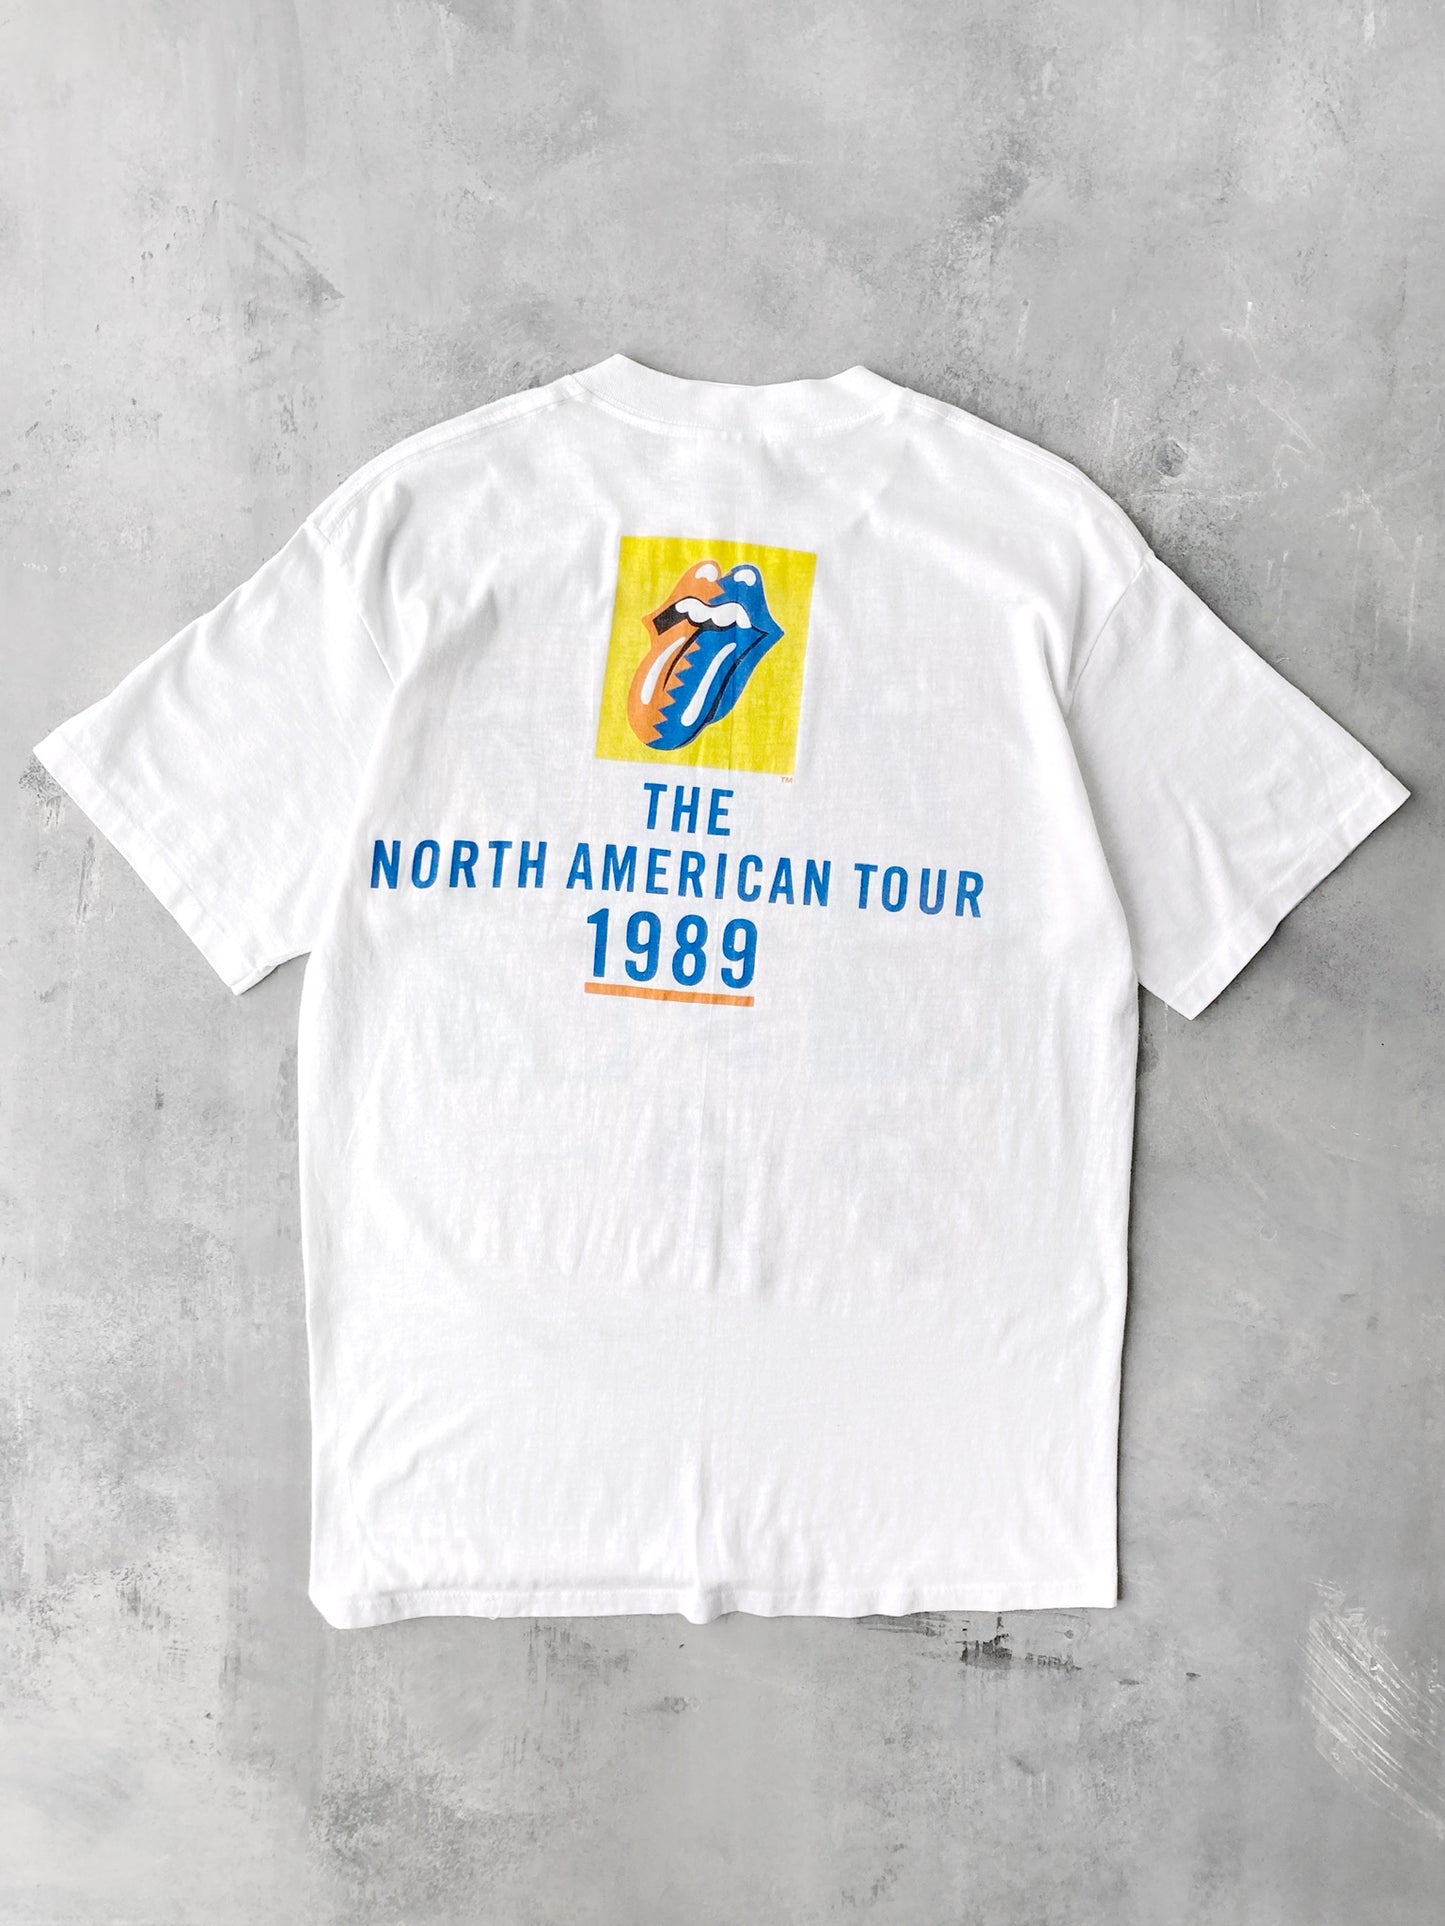 Rolling Stones The North American Tour T-Shirt '89 - Large